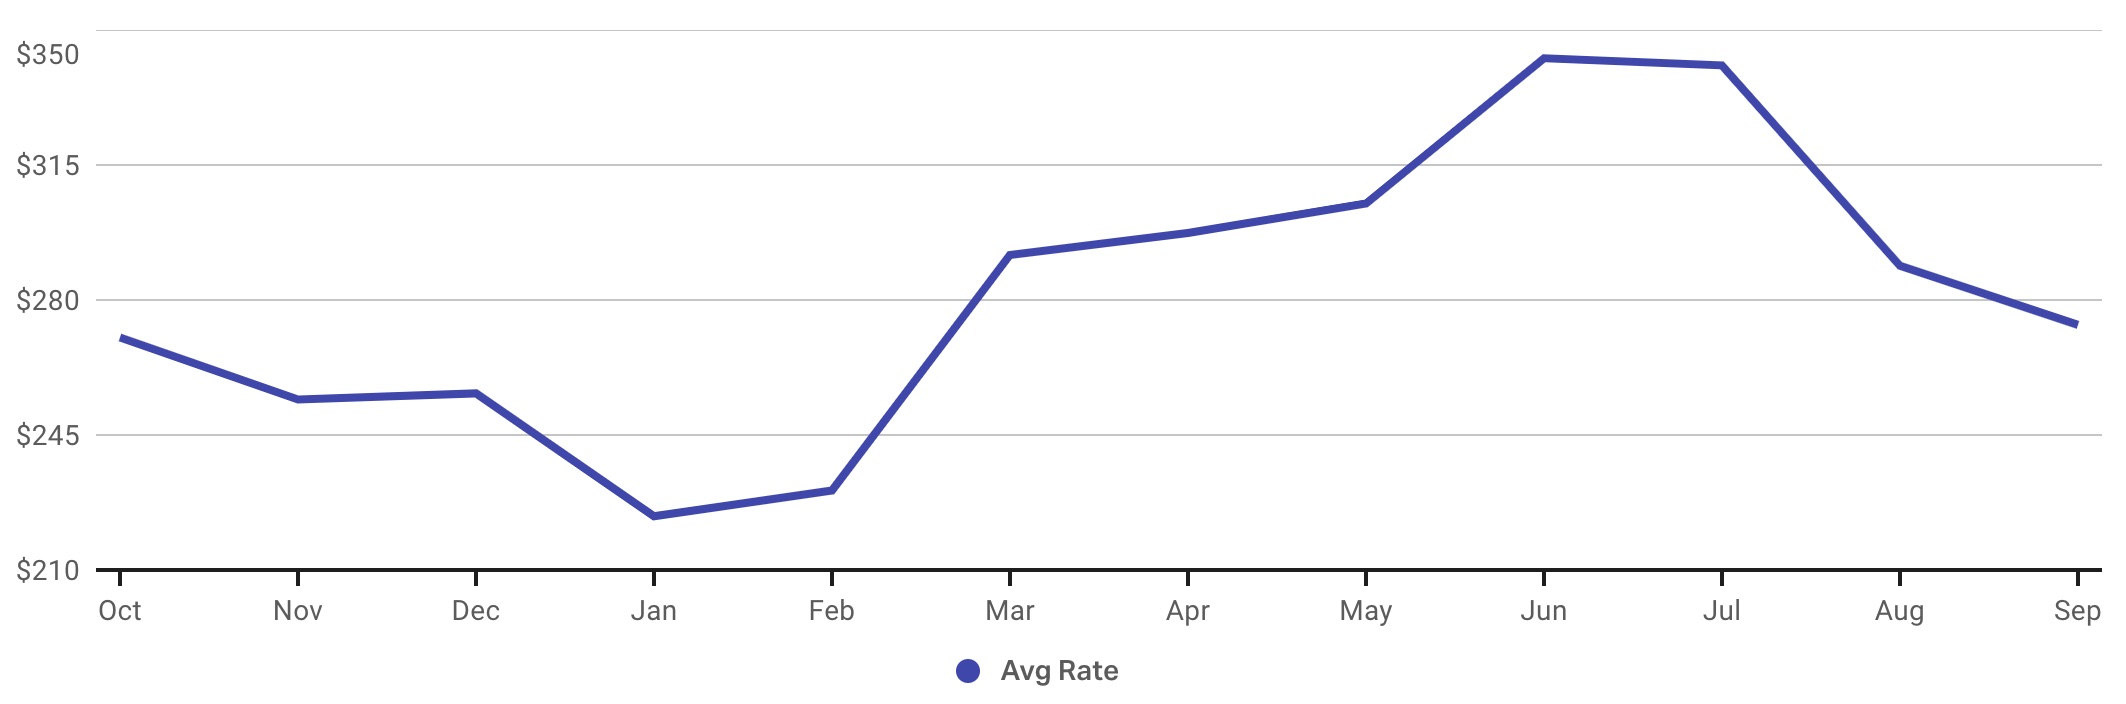 Chart showing historical average daily rate data for vacation rentals in Panama City Beach.